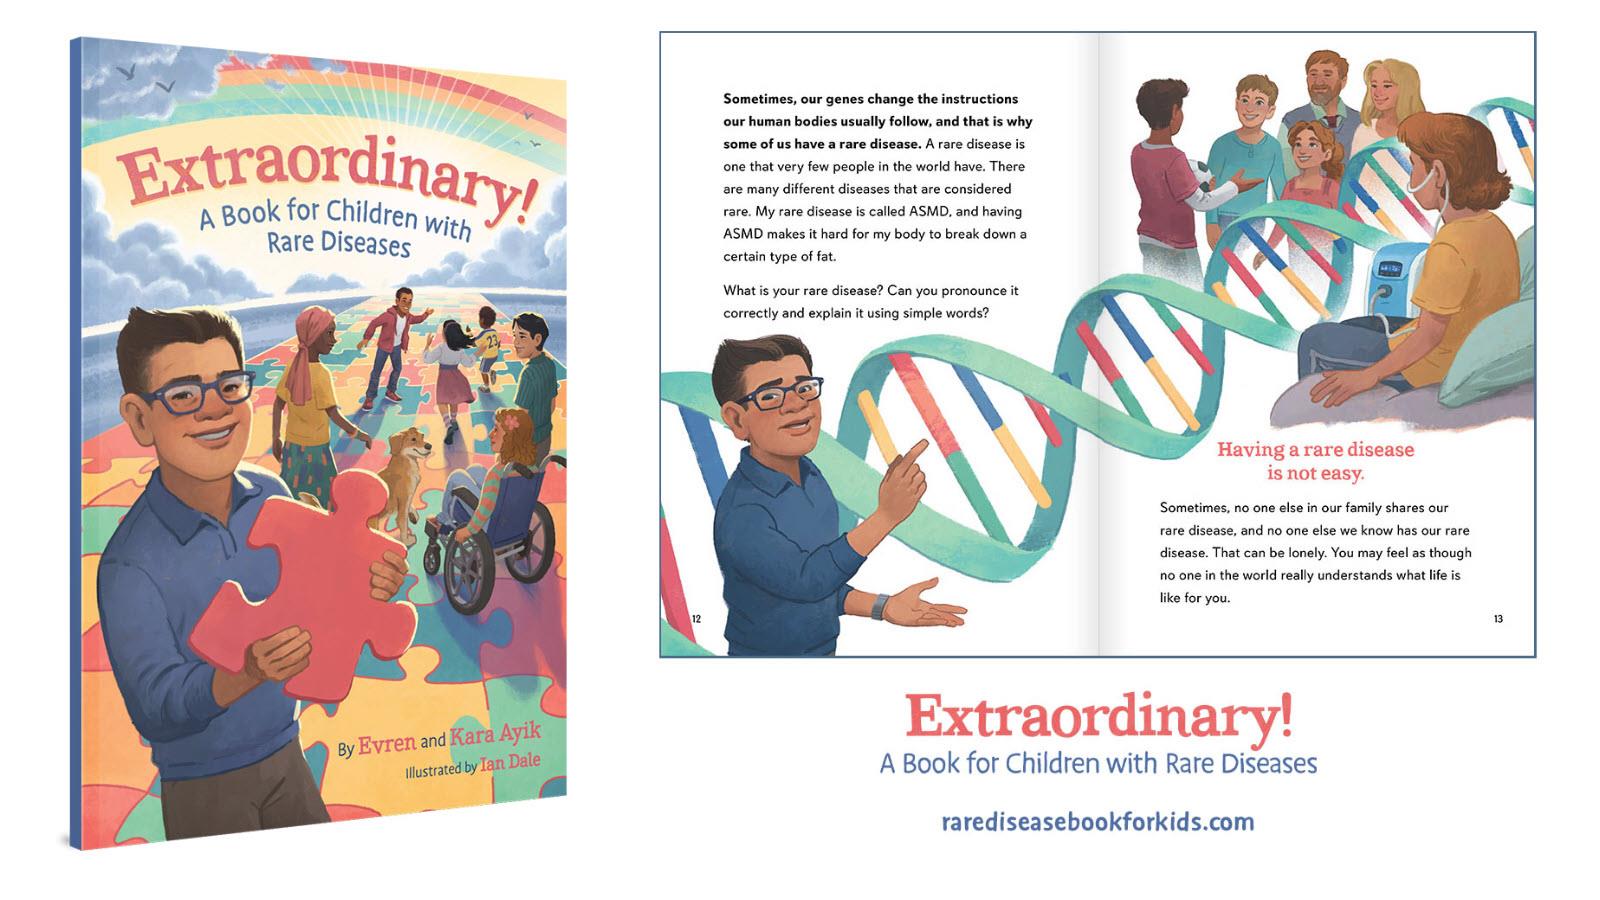 Book cover of Extraordinary, a children's book for kids who have rare diseases - a red puzzle piece and blue DNA strand.